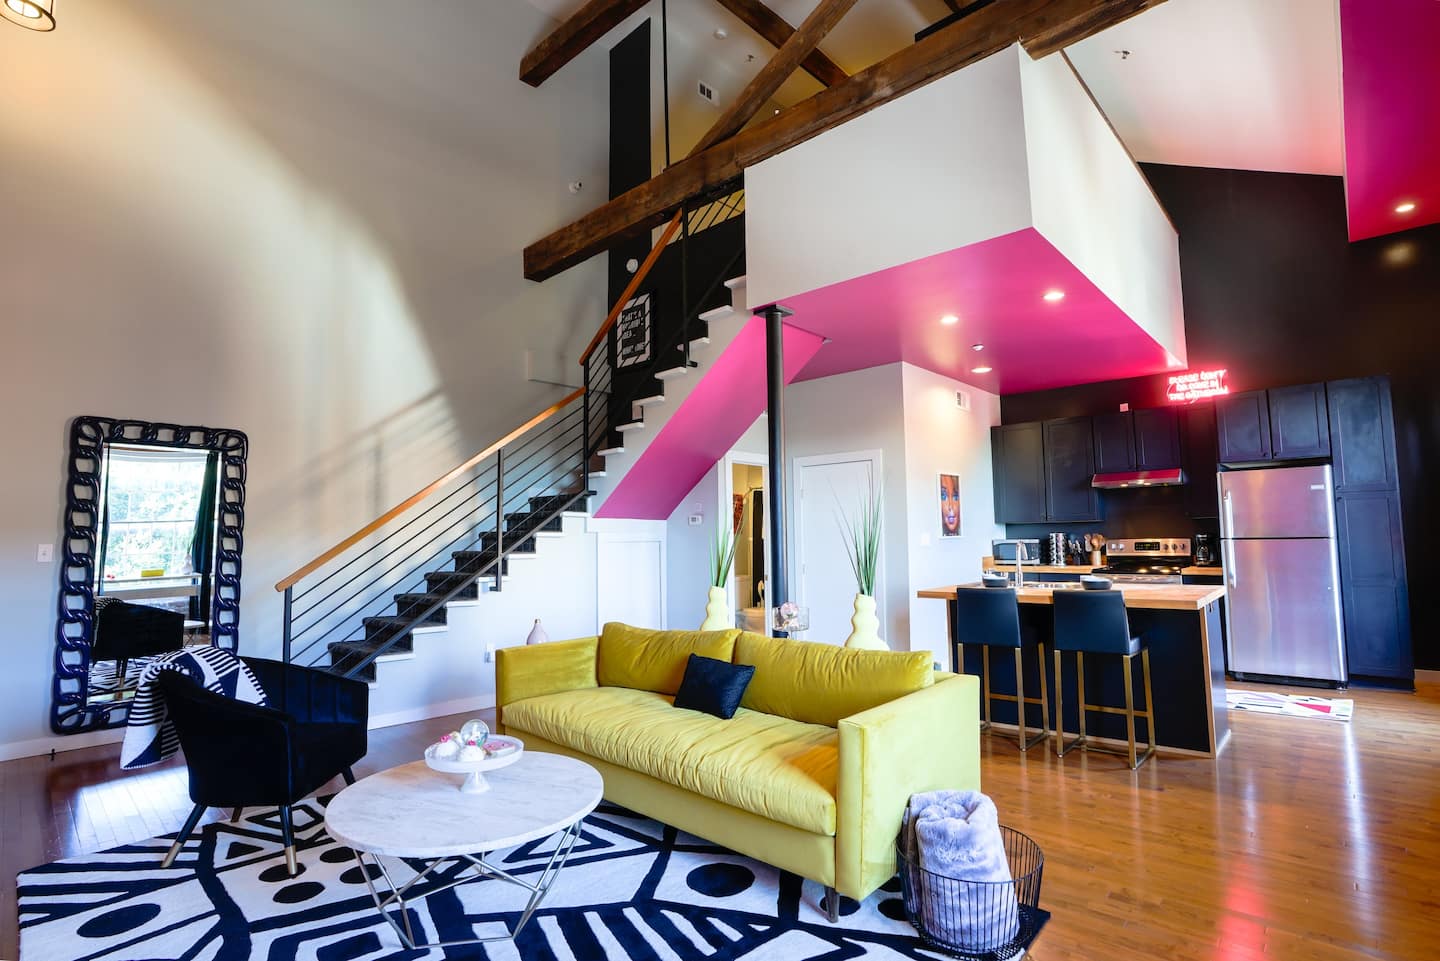 Funky and eclectic New Orleans AirBNB stay.  Studio with loft bedroom, full kitchen and fun decor.